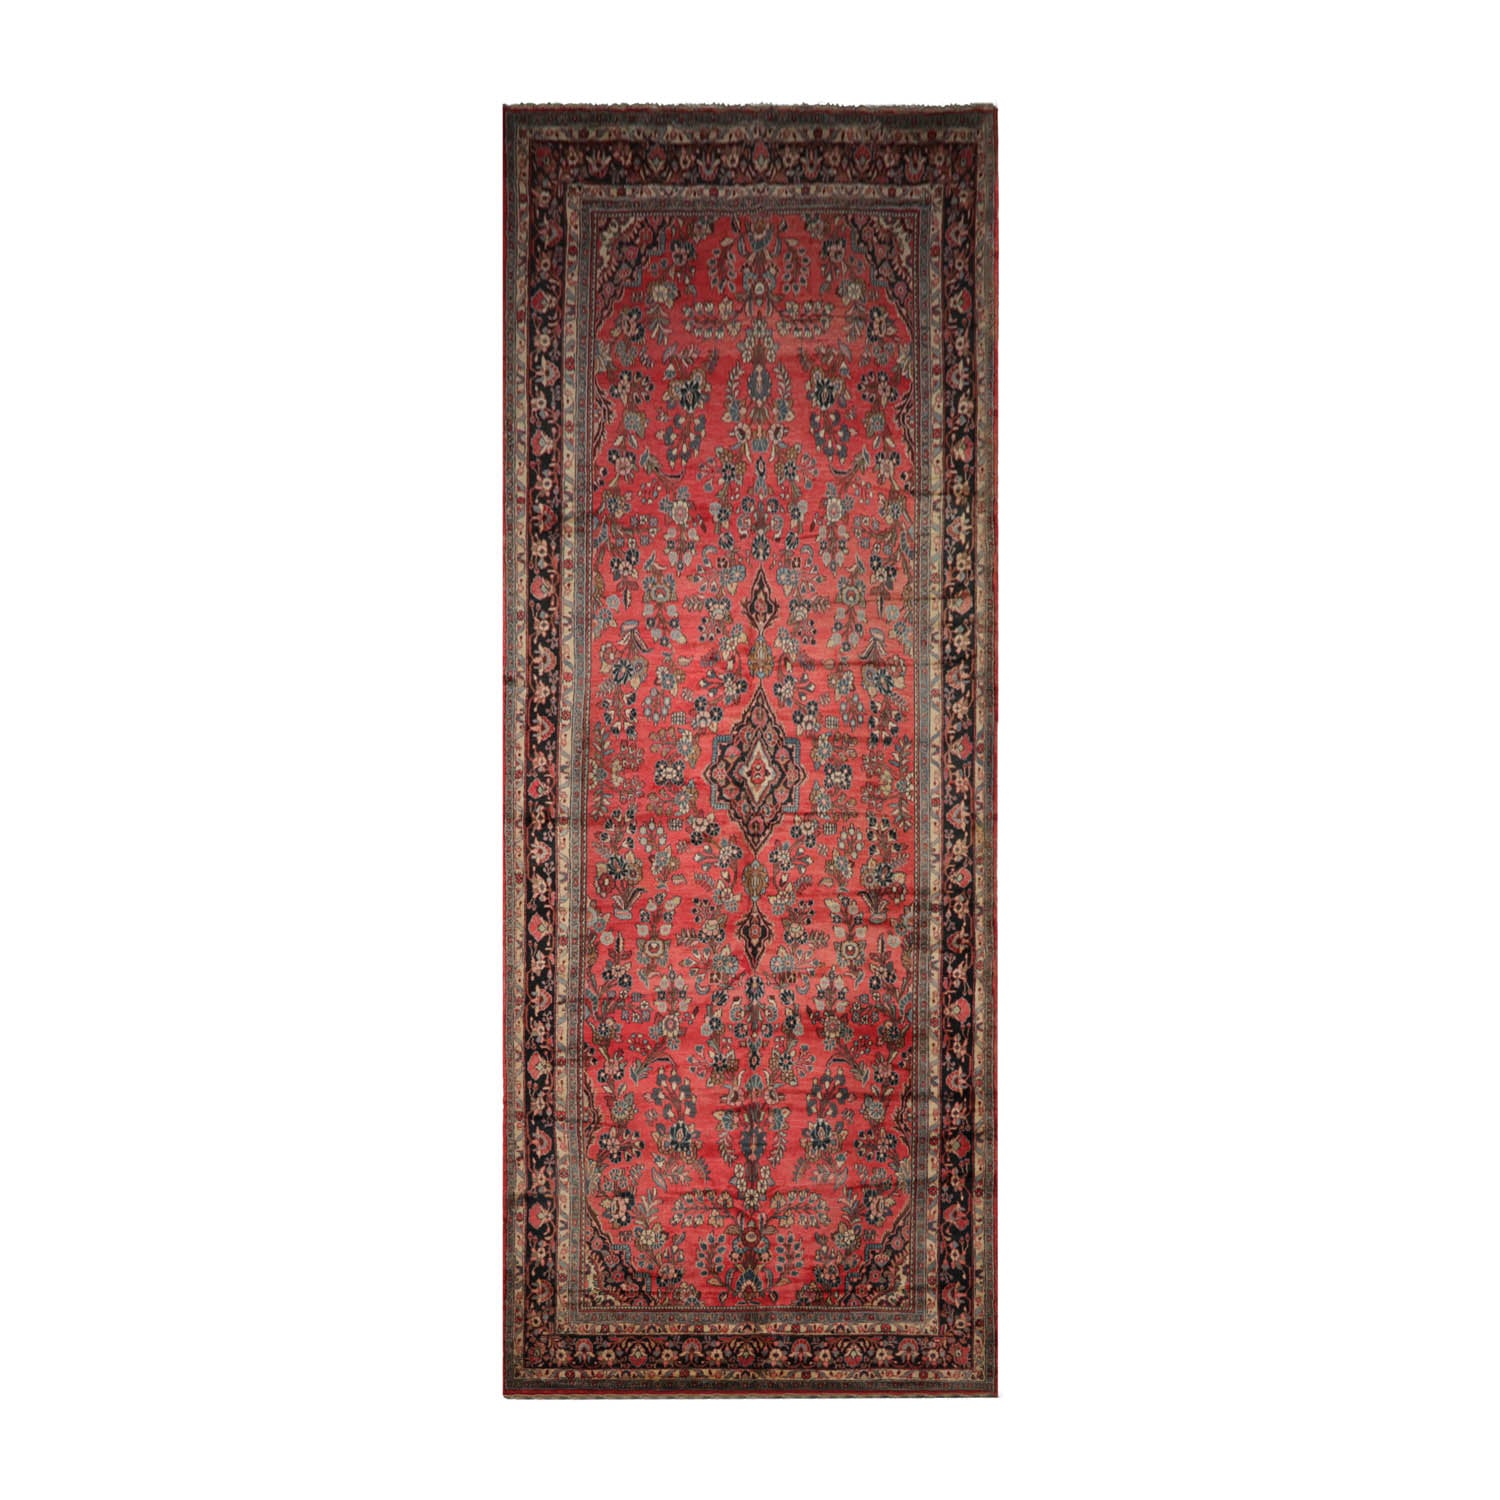 Alexx Palace Hand Knotted 100% Wool Lilihaan Traditional Oriental Area Rug Rose, Charcoal Color